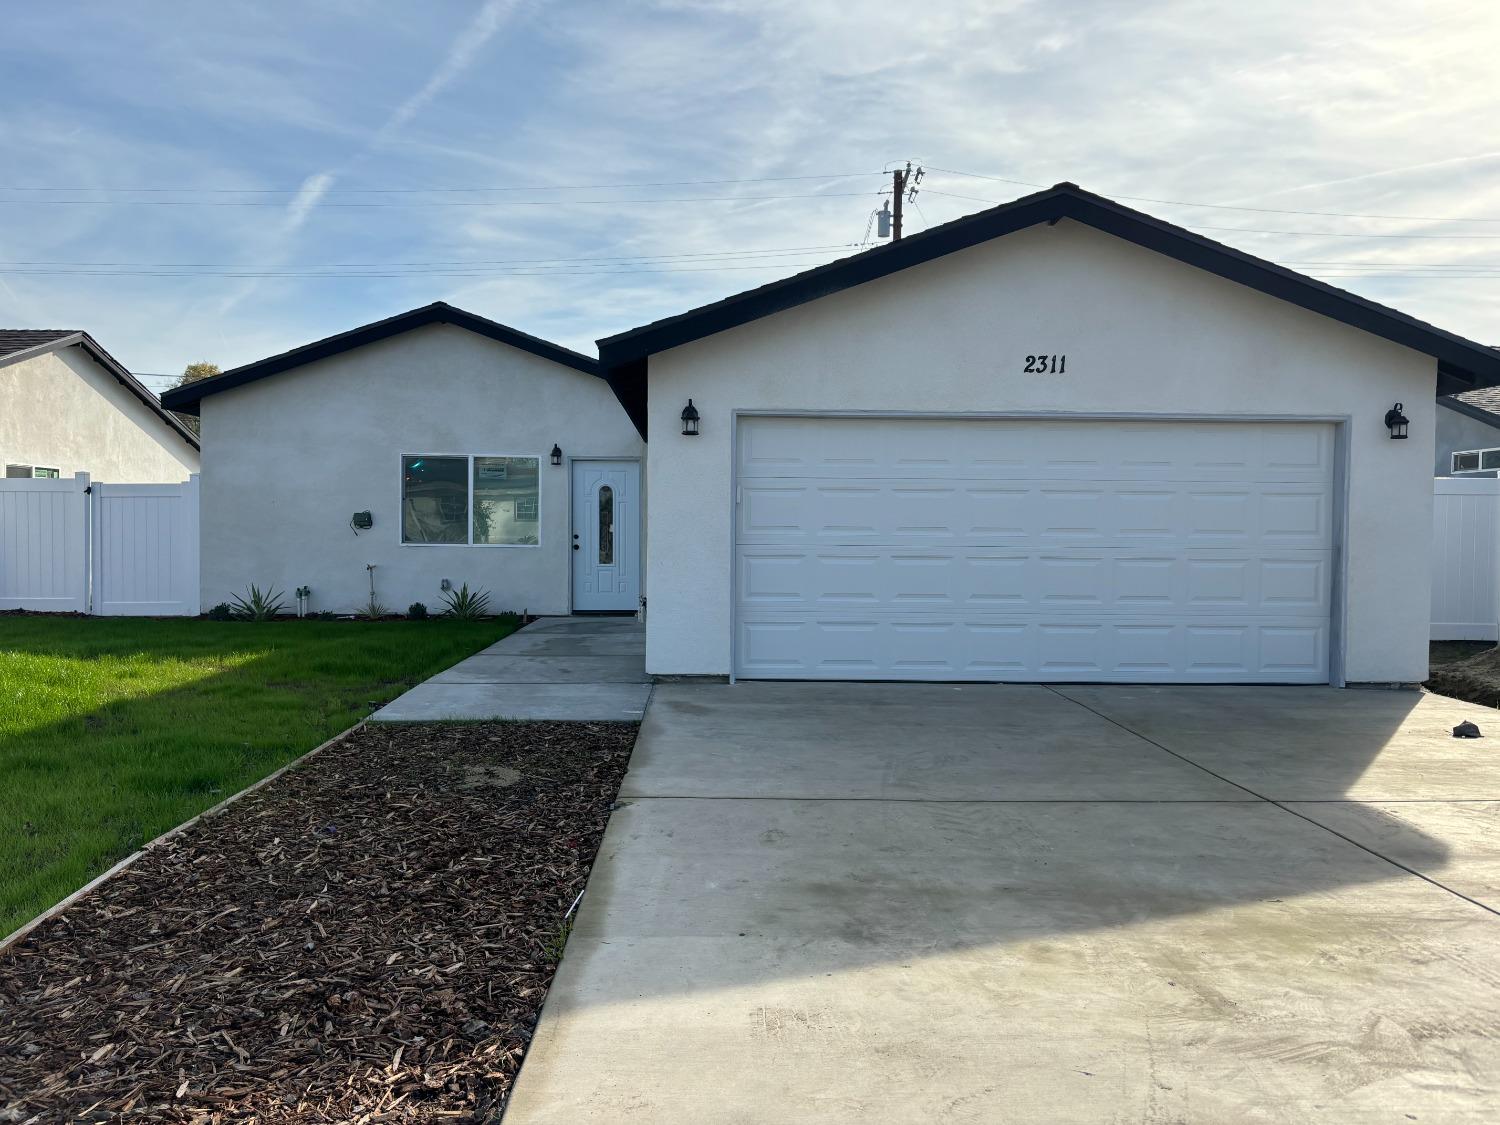 Photo of 2311 Patterson in Corcoran, CA